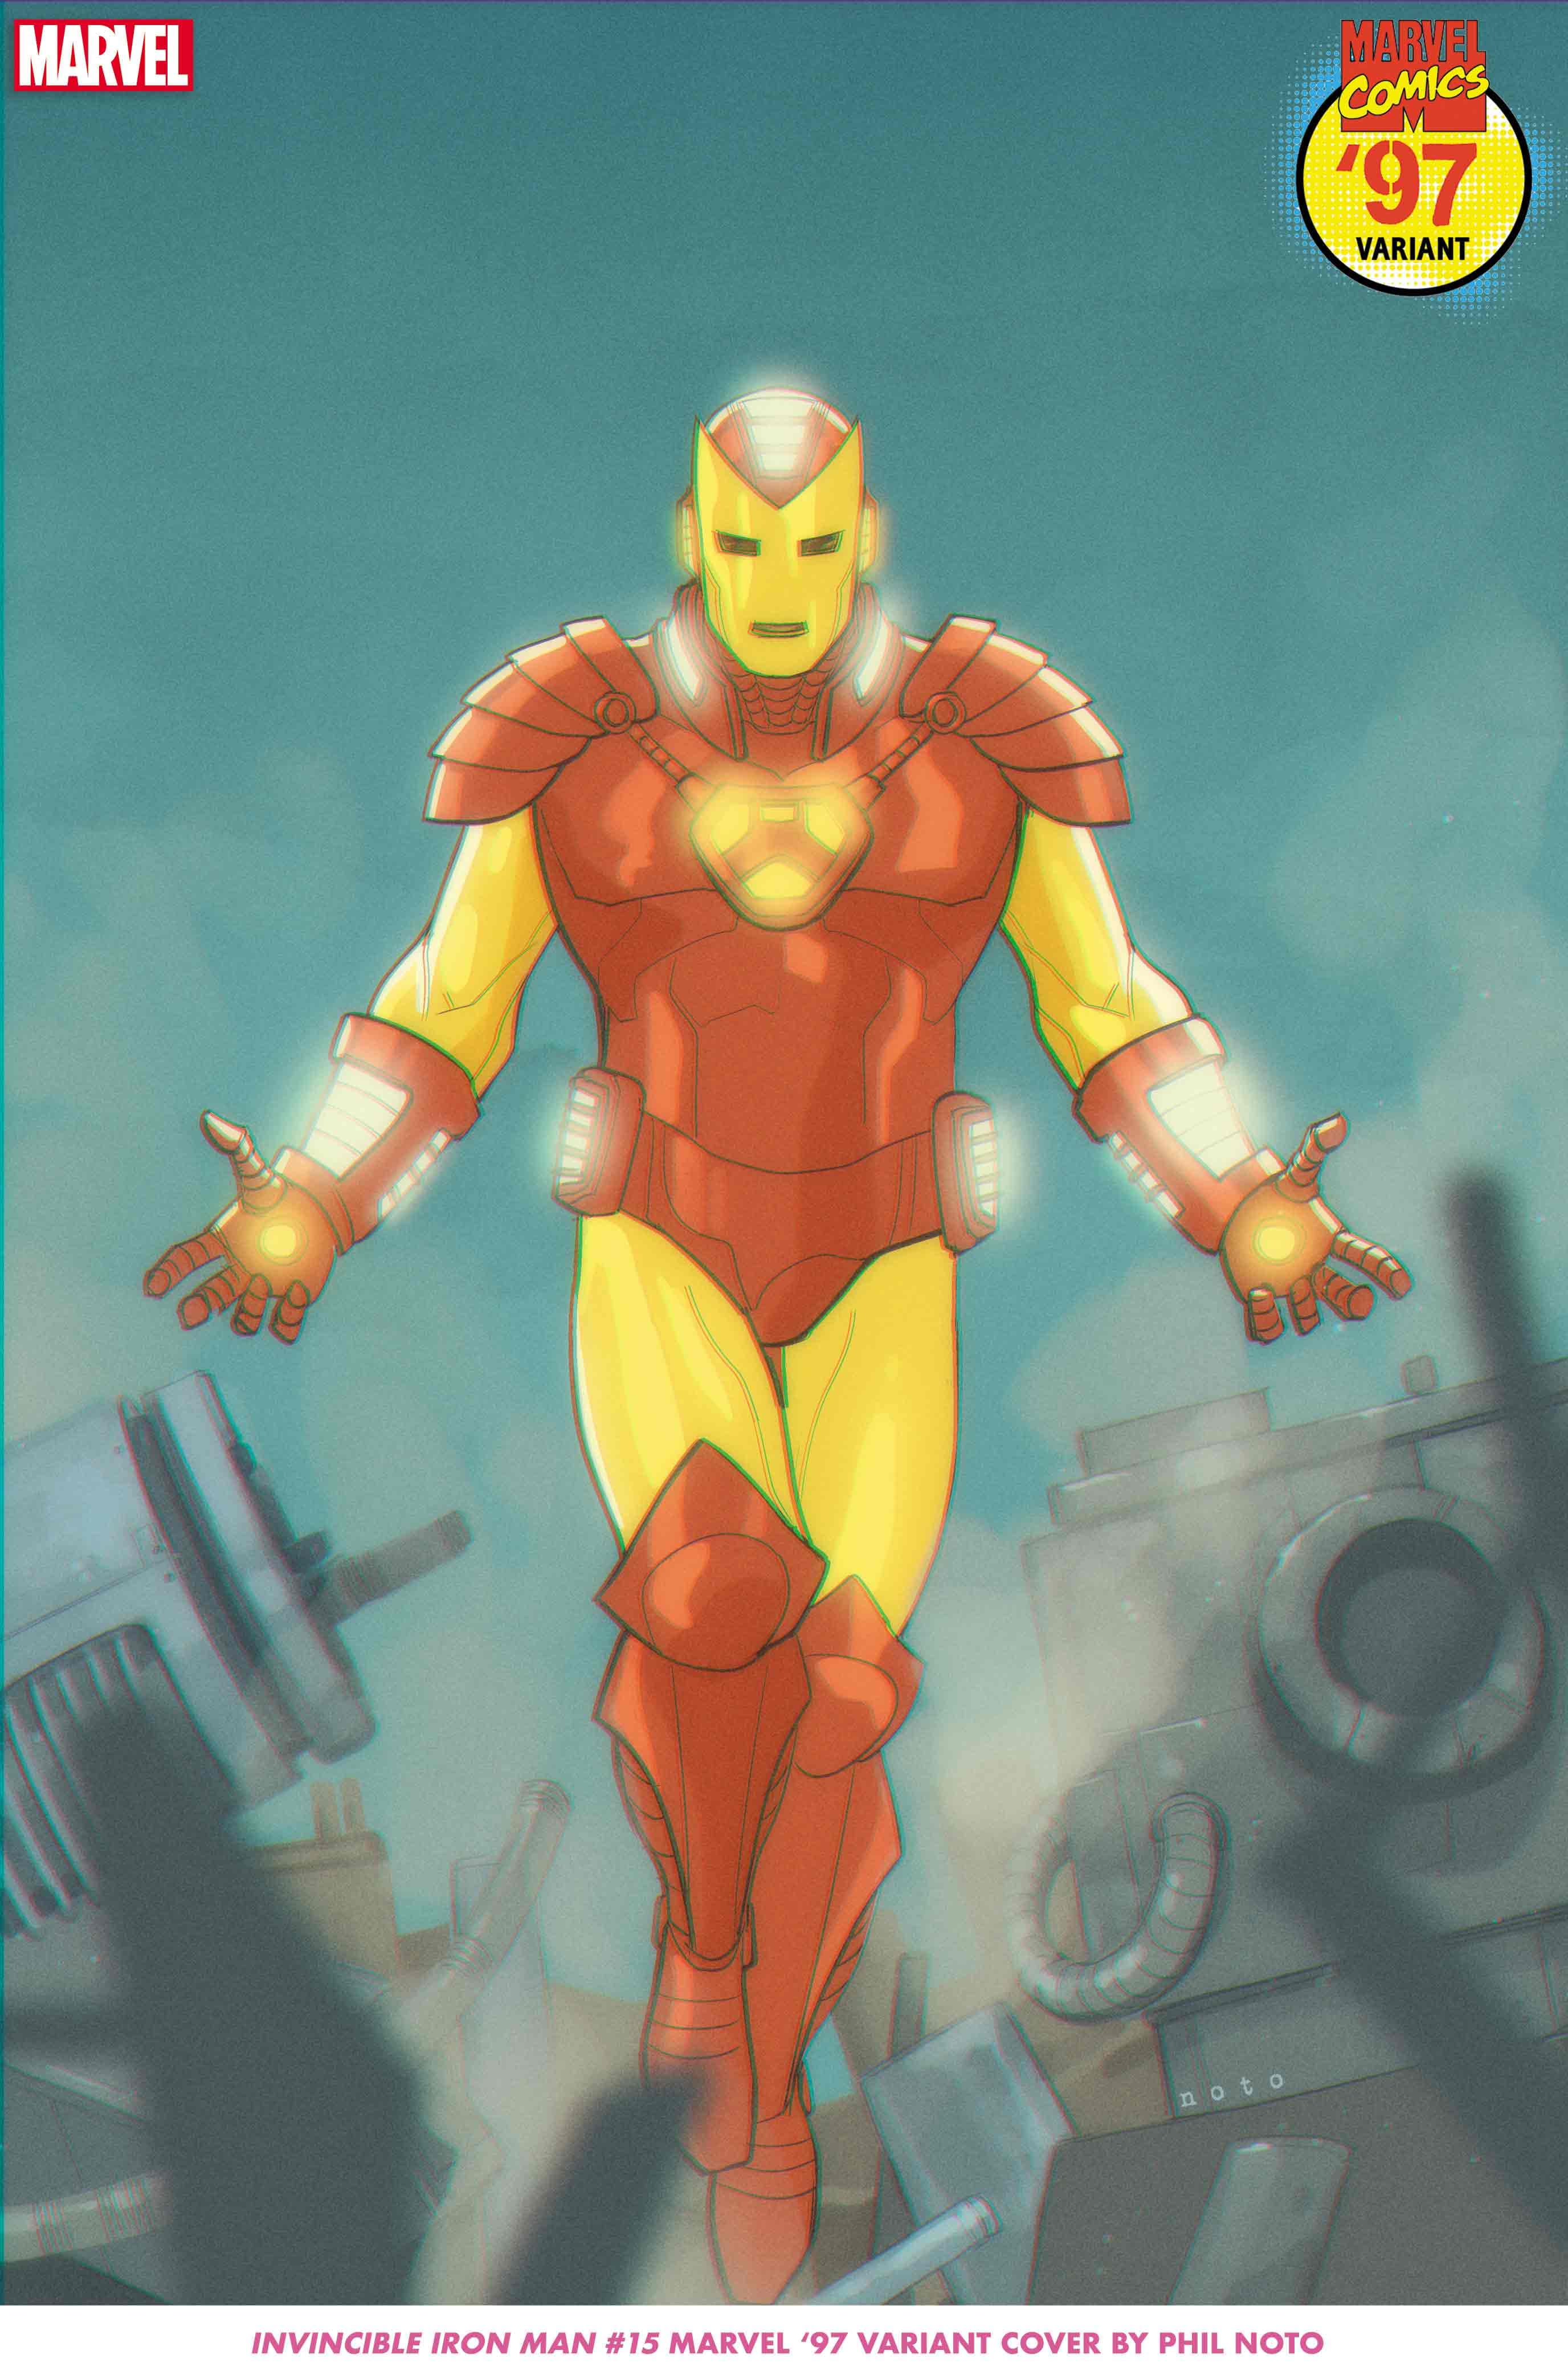 INVINCIBLE IRON MAN #15 Marvel ‘97 Variant Cover by Phil Noto​​​​​​​